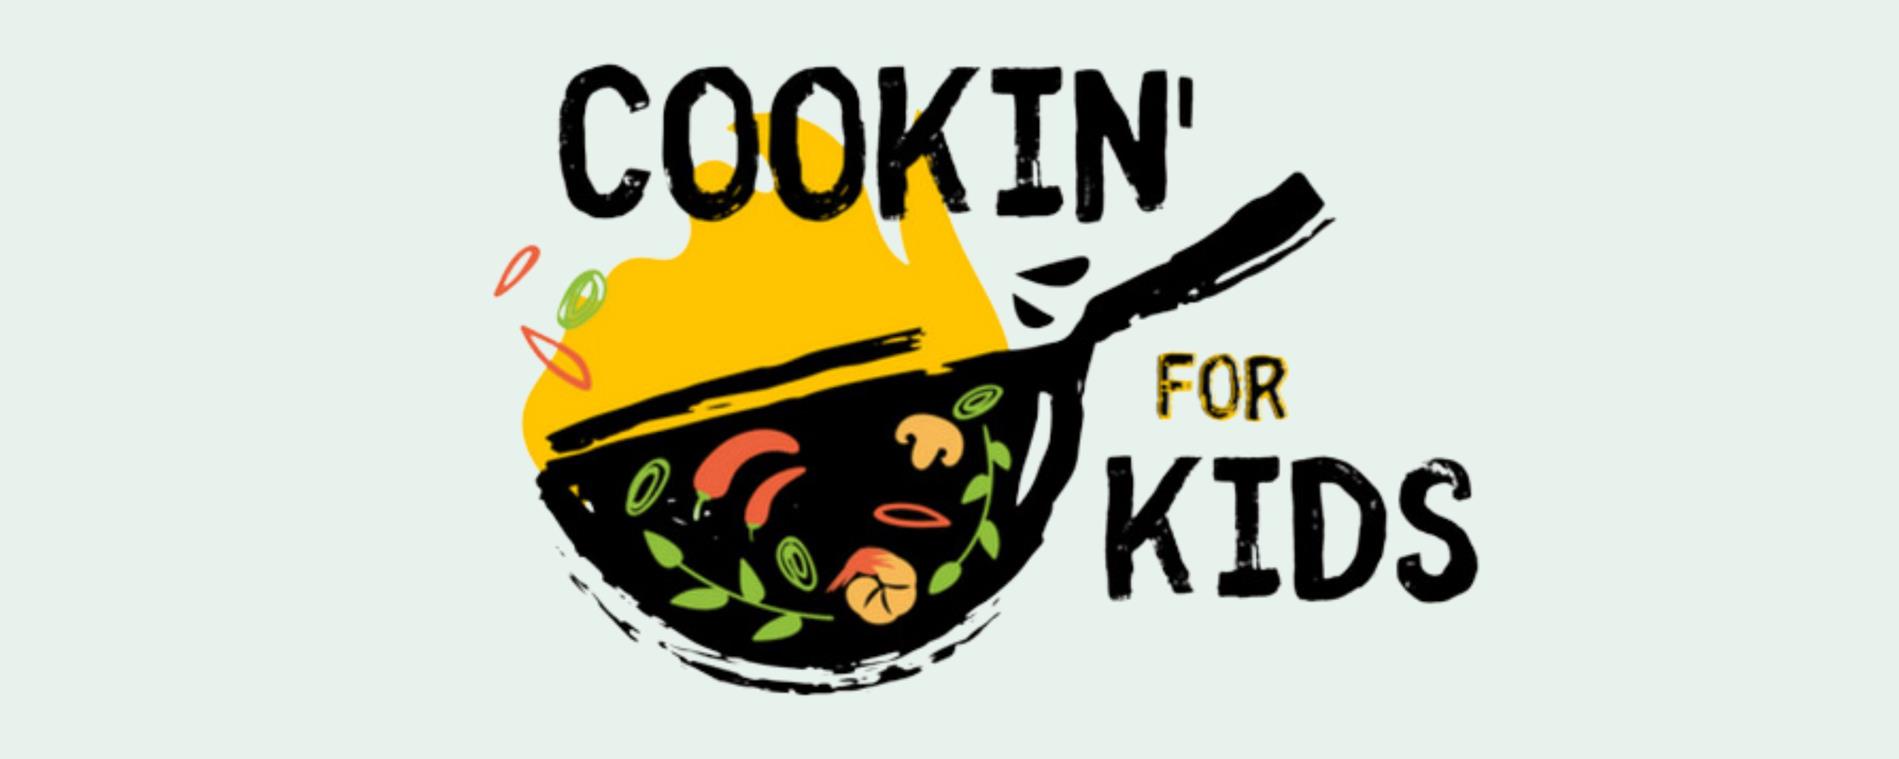 Cooking for Kids Banner